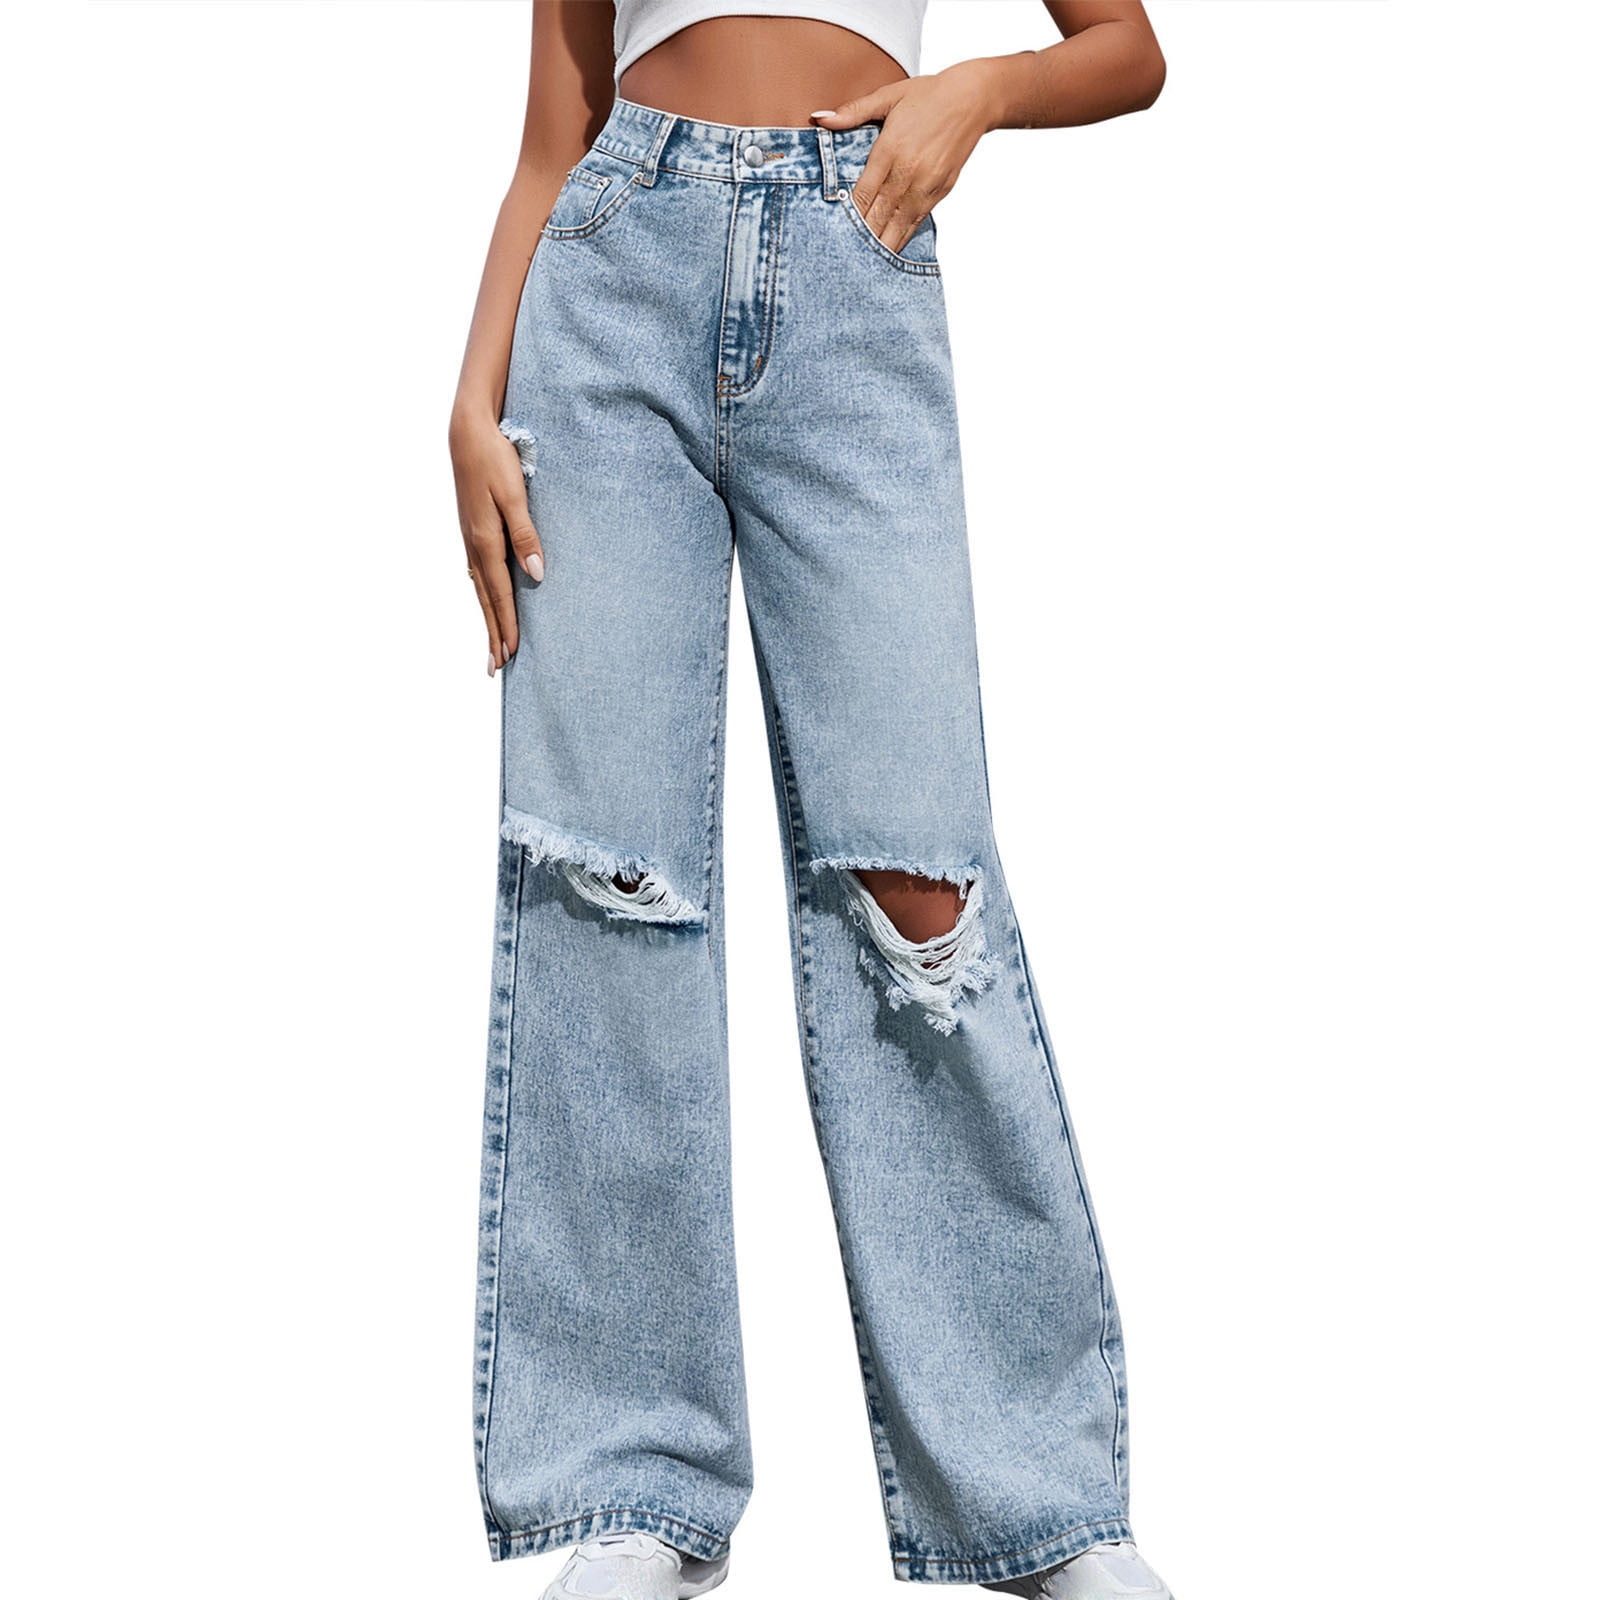 Women's Ripped Jeans Stretchy High Waisted Straight Wide Leg Denim Pants  Casual Loose Distressed Lounge Trousers 